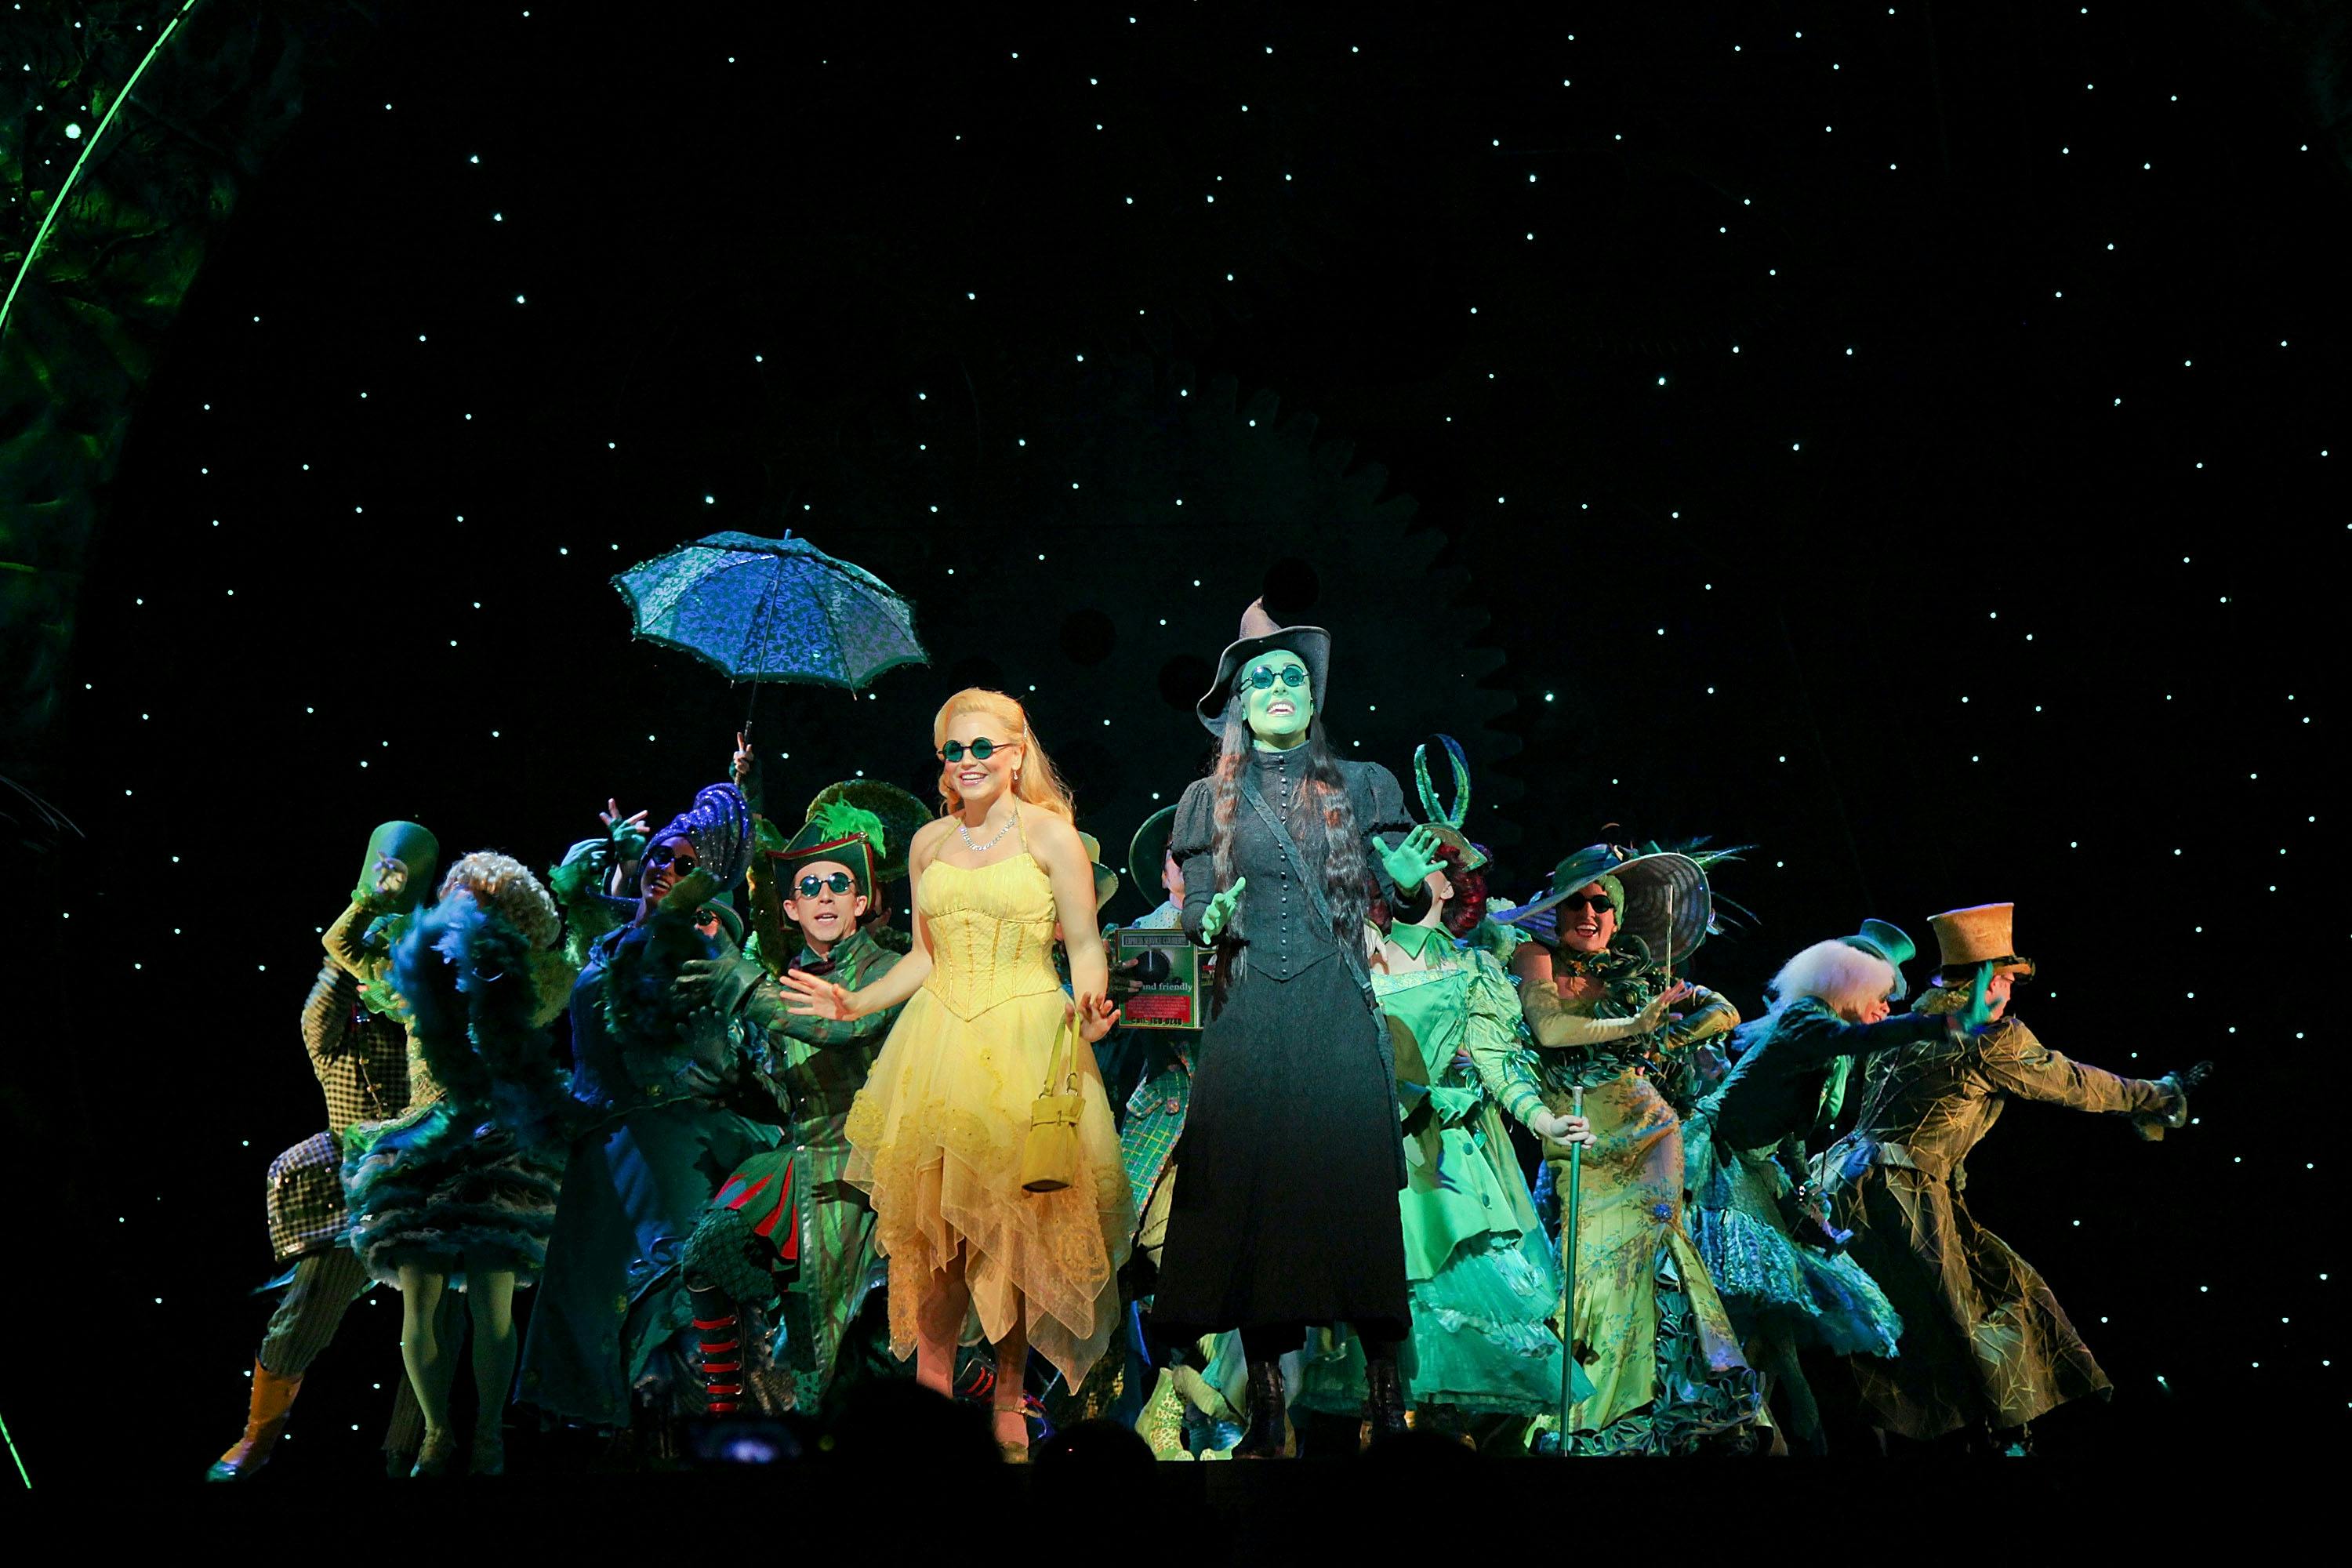 Everything to Know About the Wicked Movie